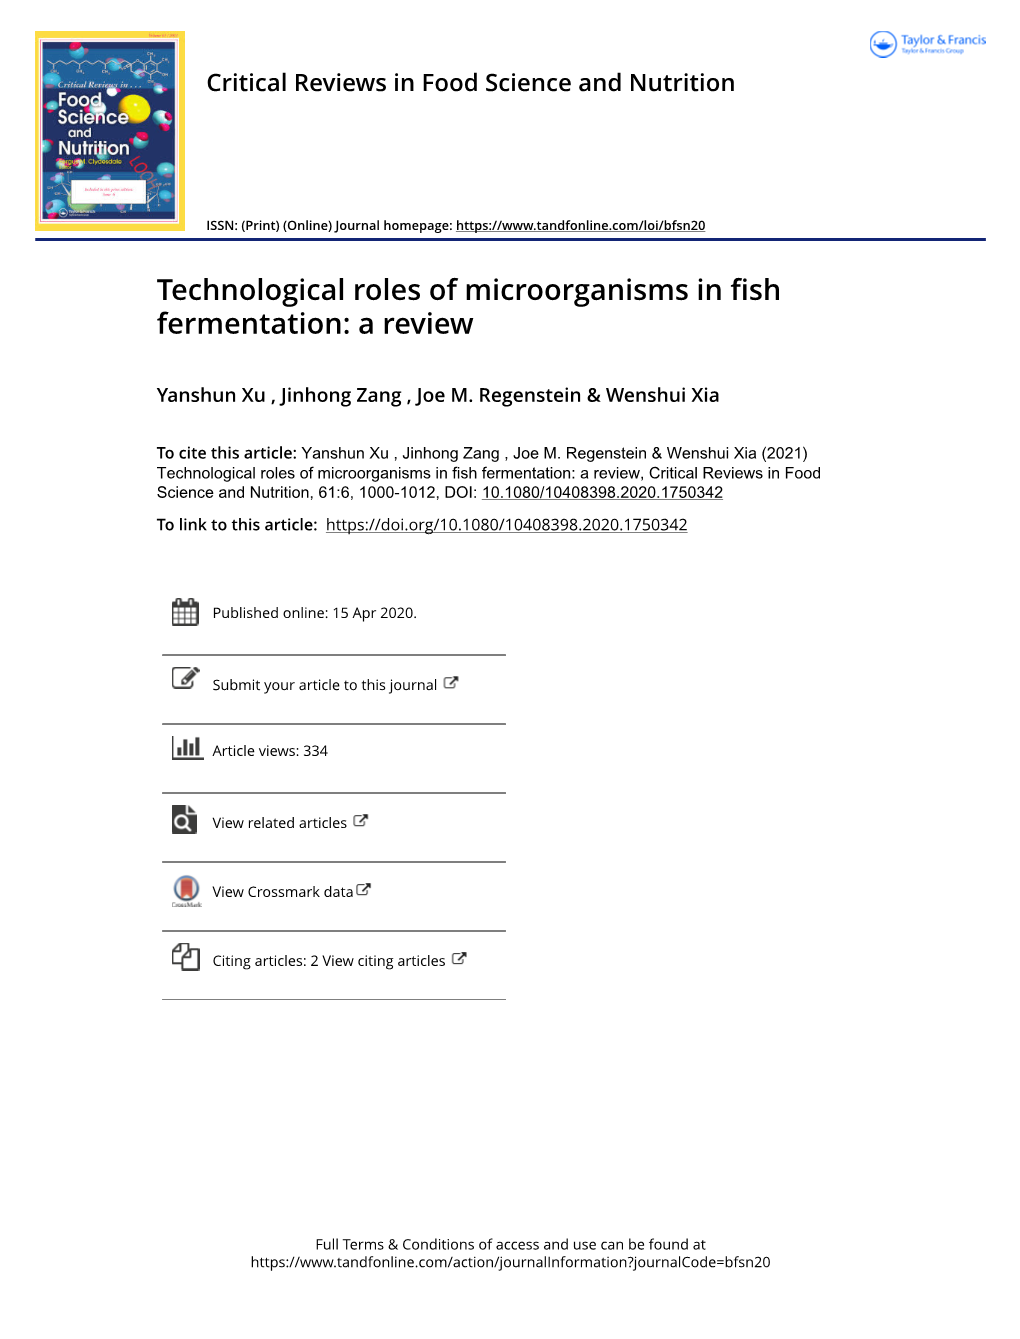 Technological Roles of Microorganisms in Fish Fermentation: a Review